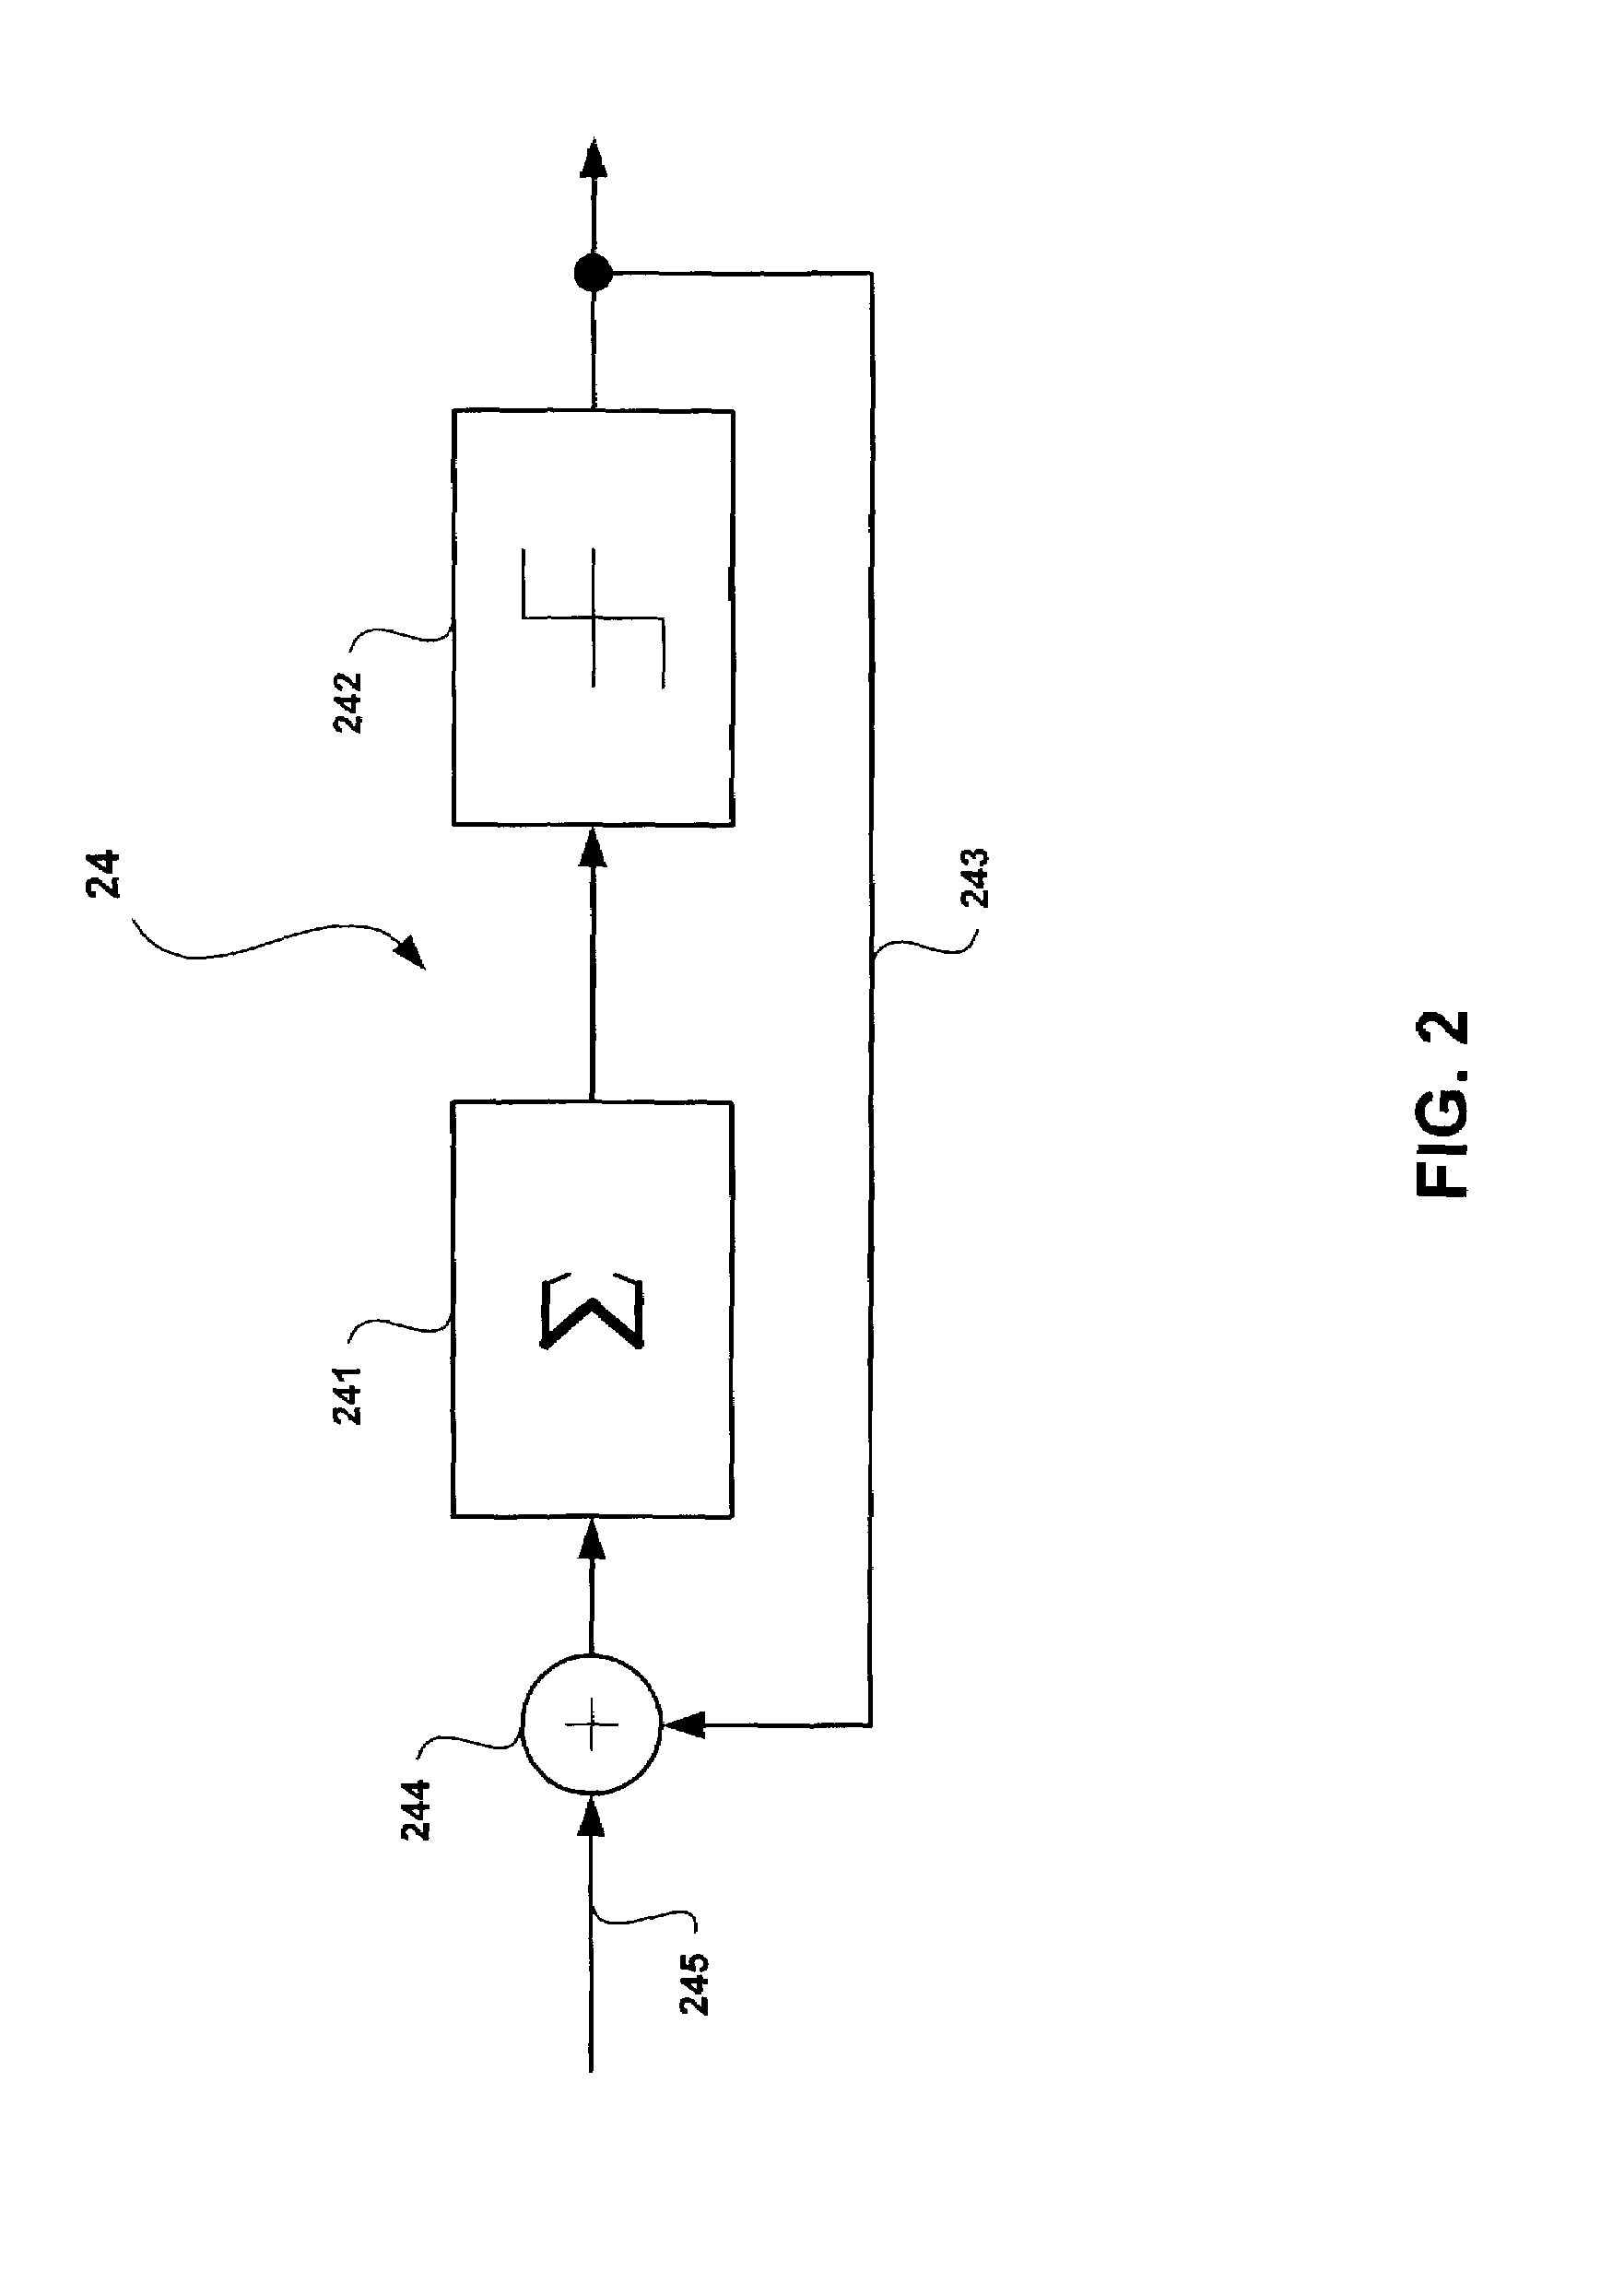 Process for generating a variable frequency signal, for instance for spreading the spectrum of a clock signal, and device therefor